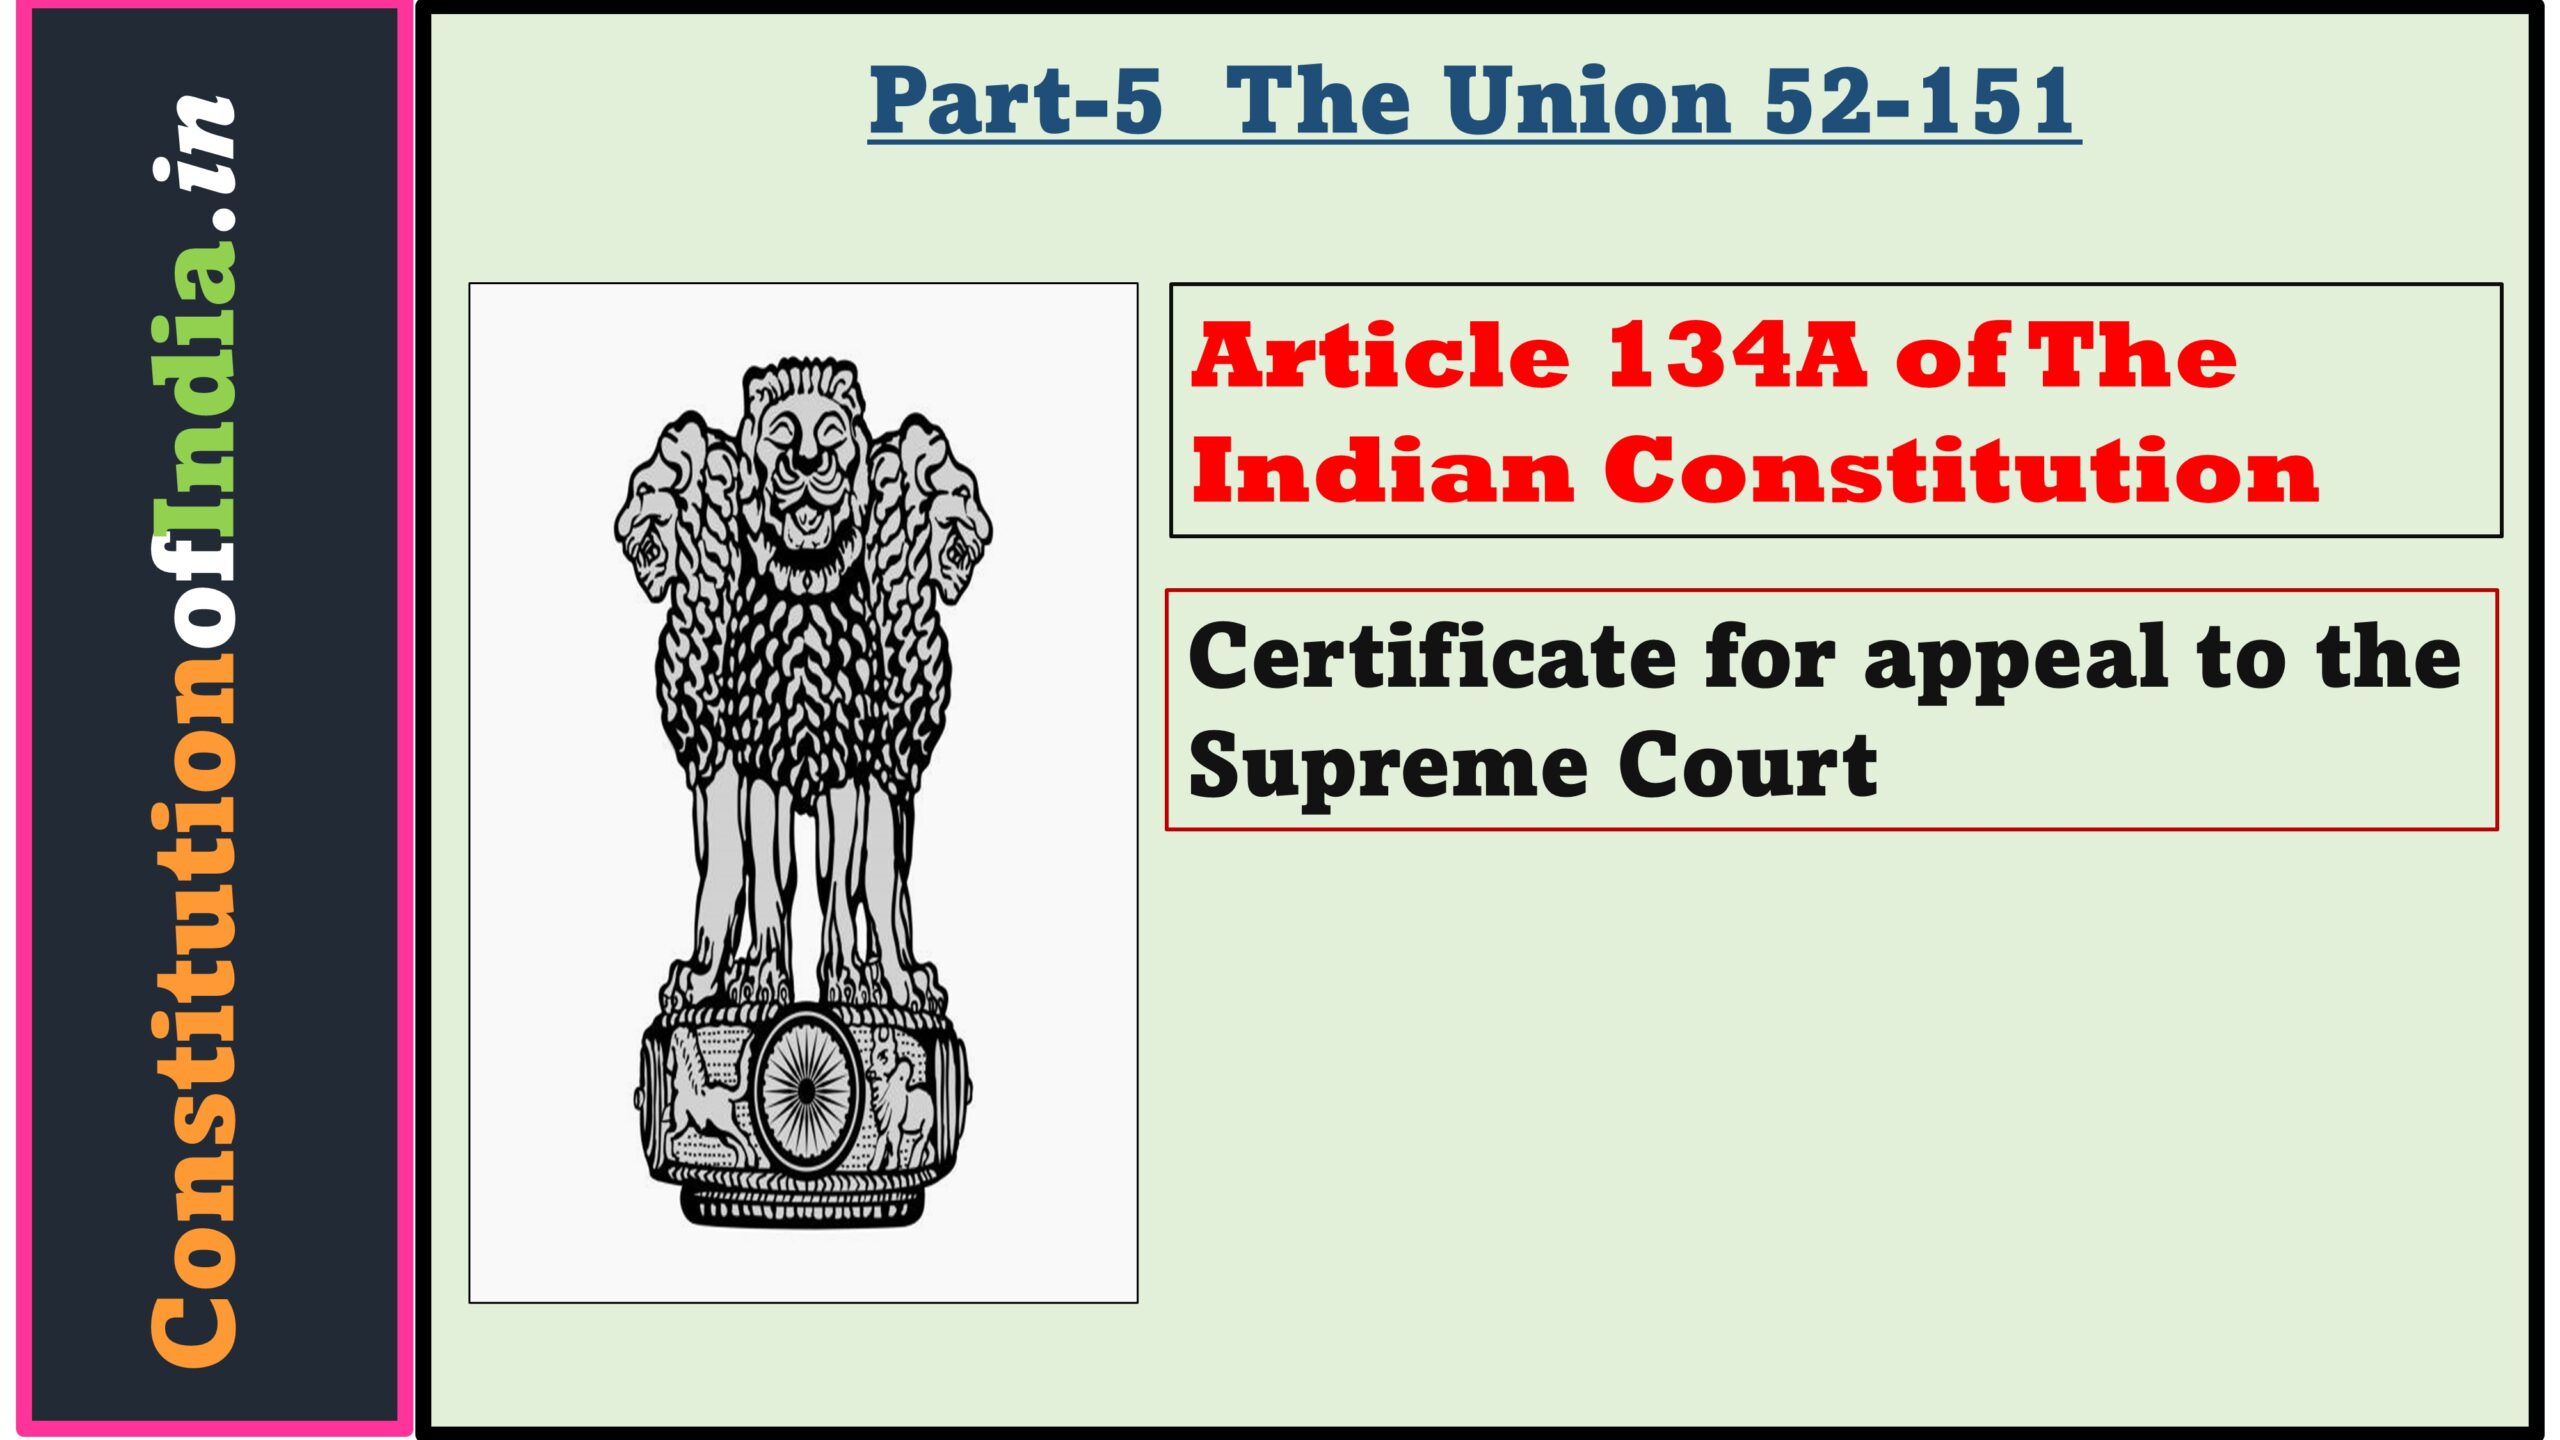 Article 134A of The Indian Constitution